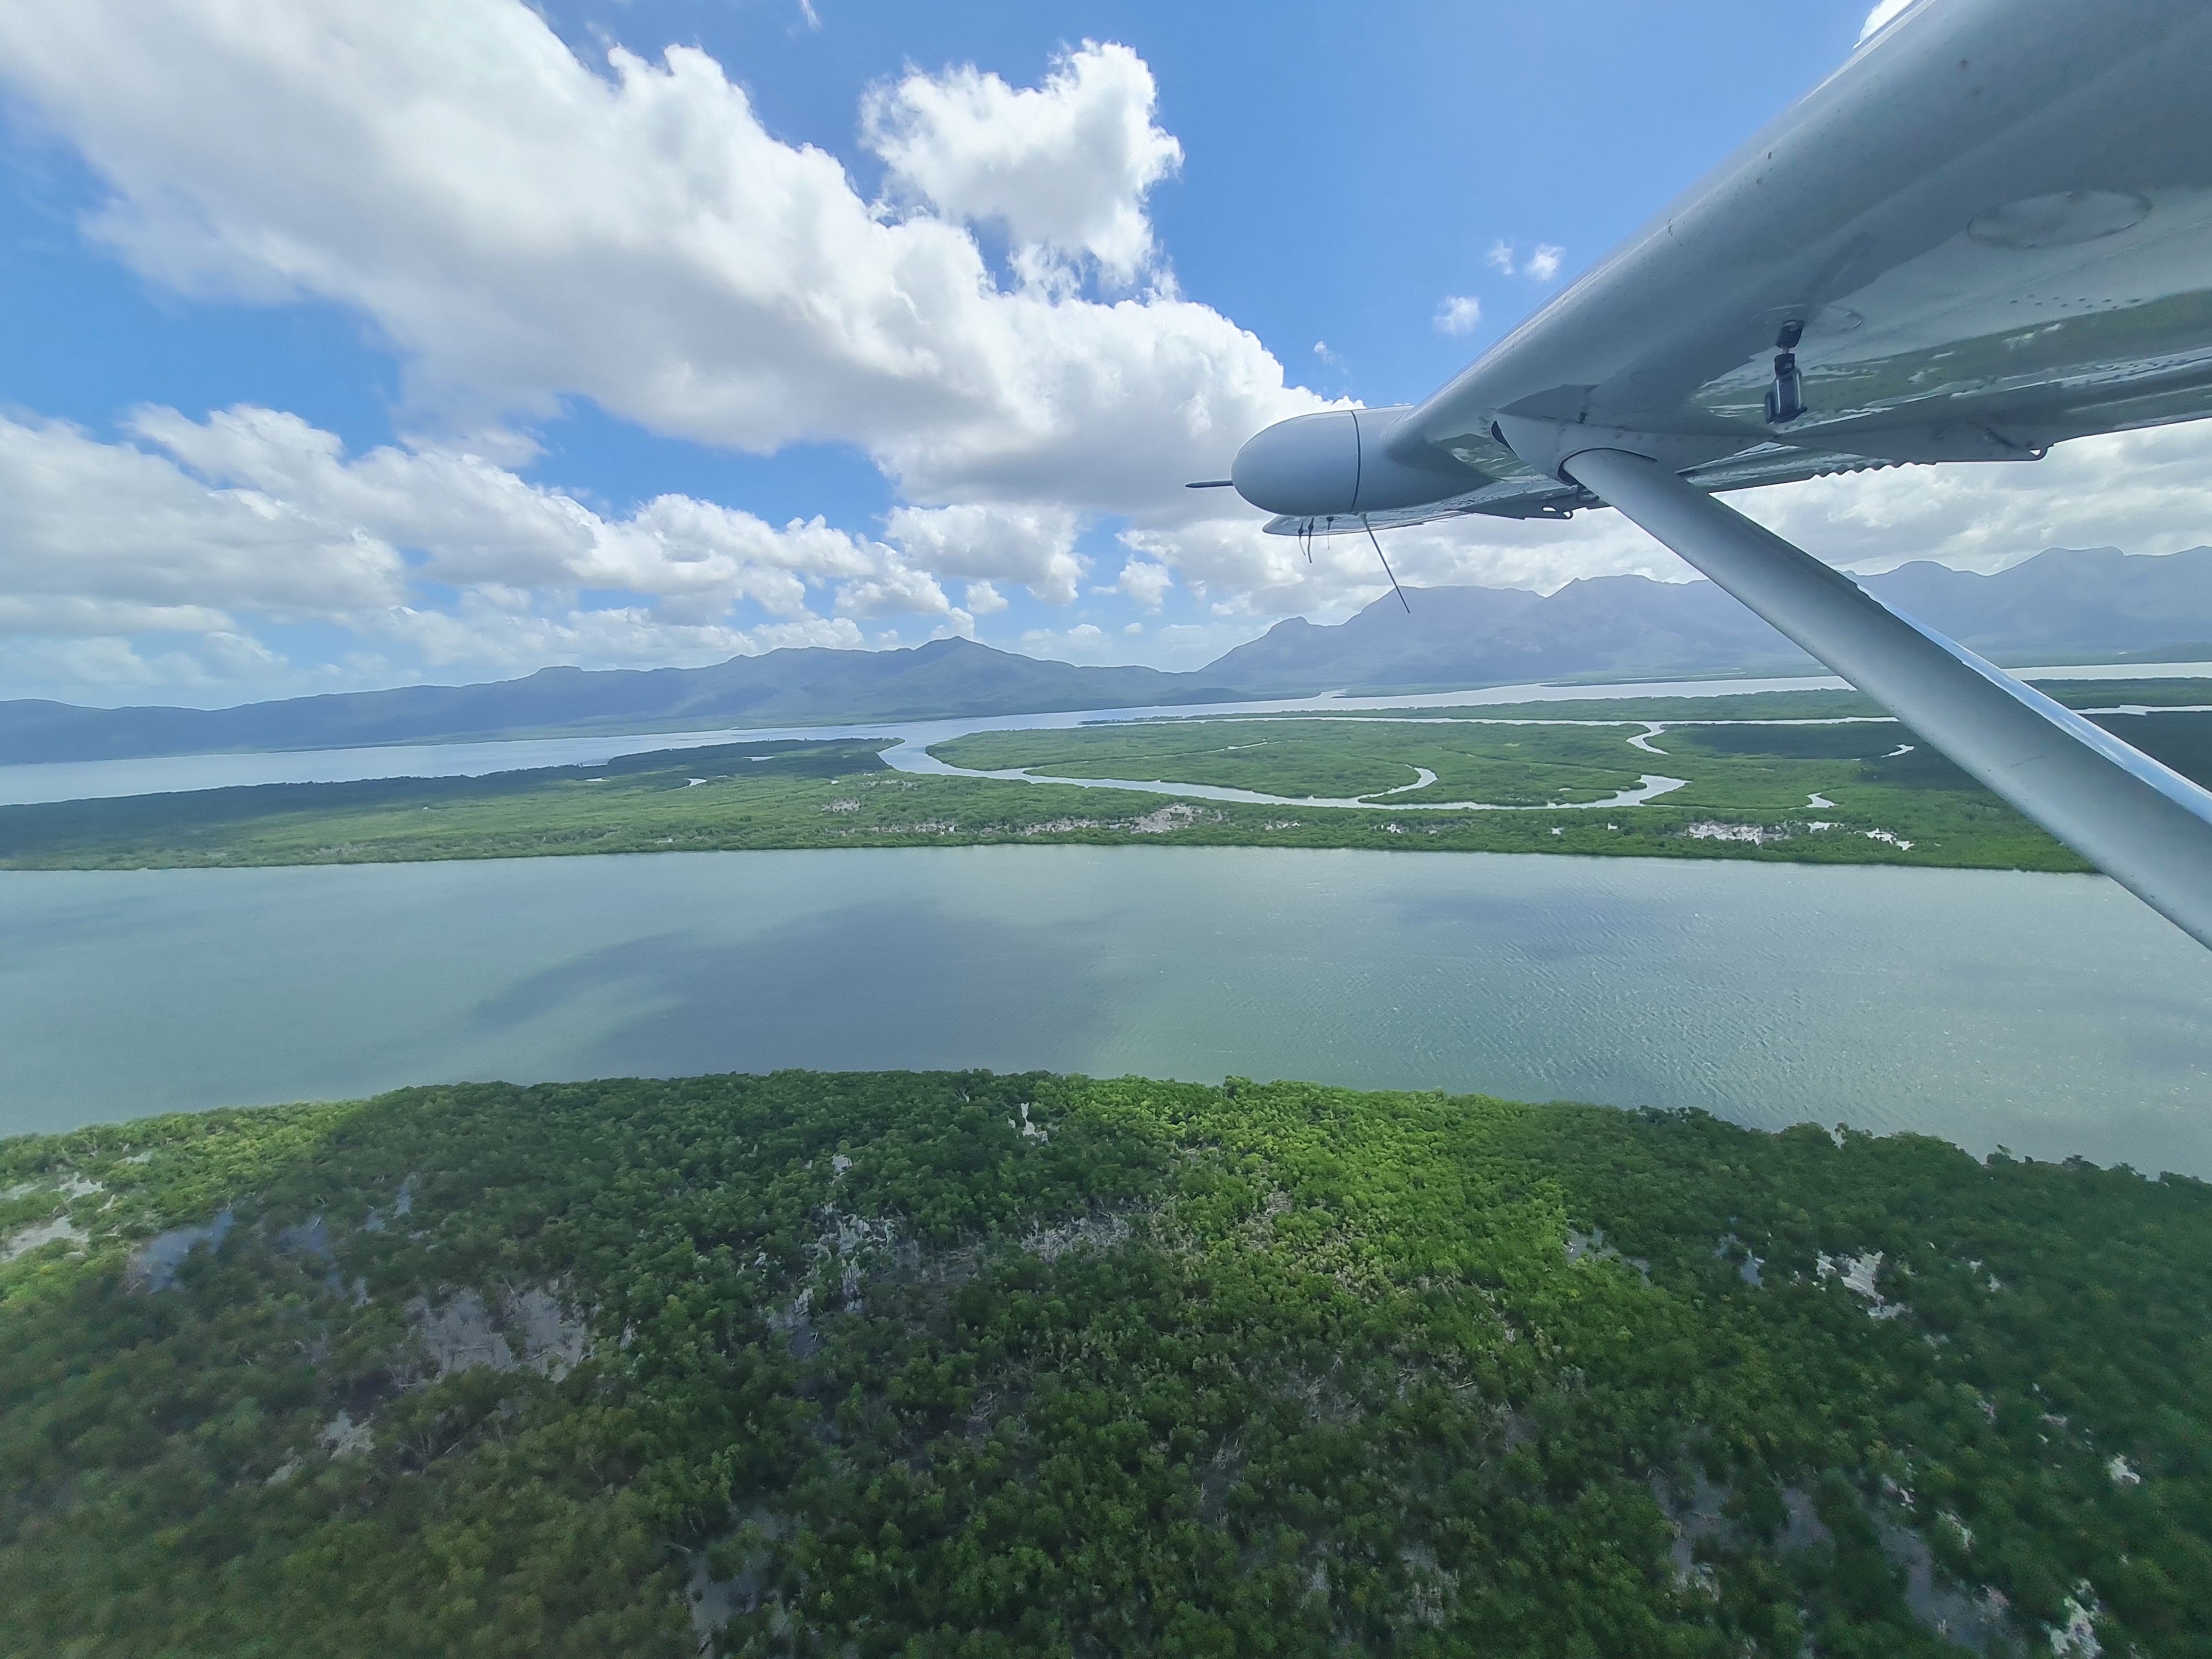 Moving along this coastal fringe, we flew up the Hinchinbrook Channel.